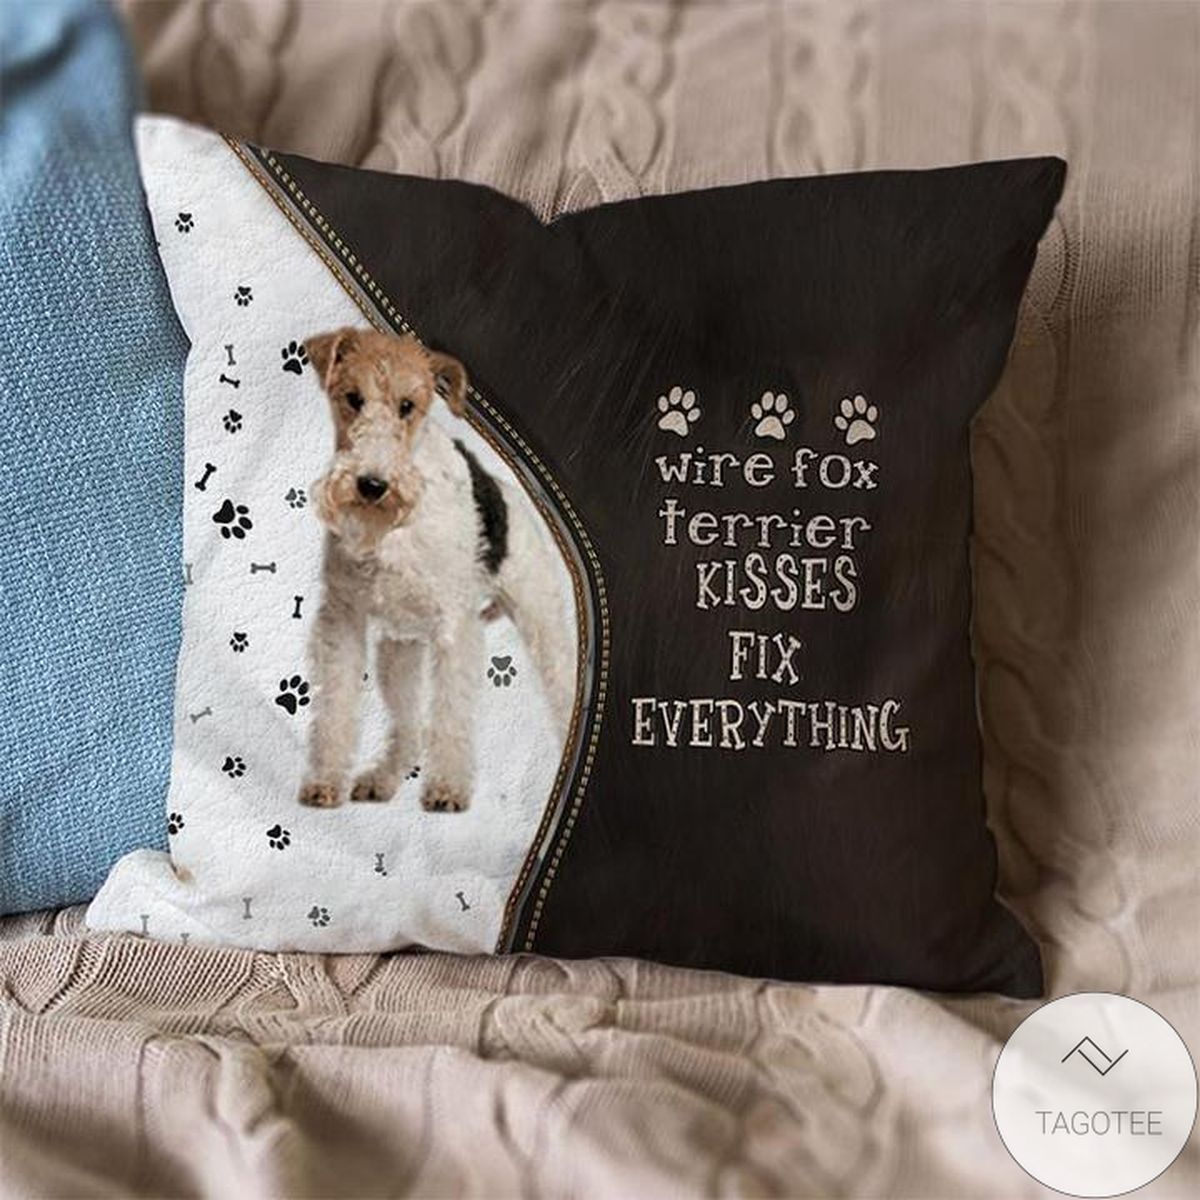 Wire Fox Terrier Kisses Fix Everything Pillowcase